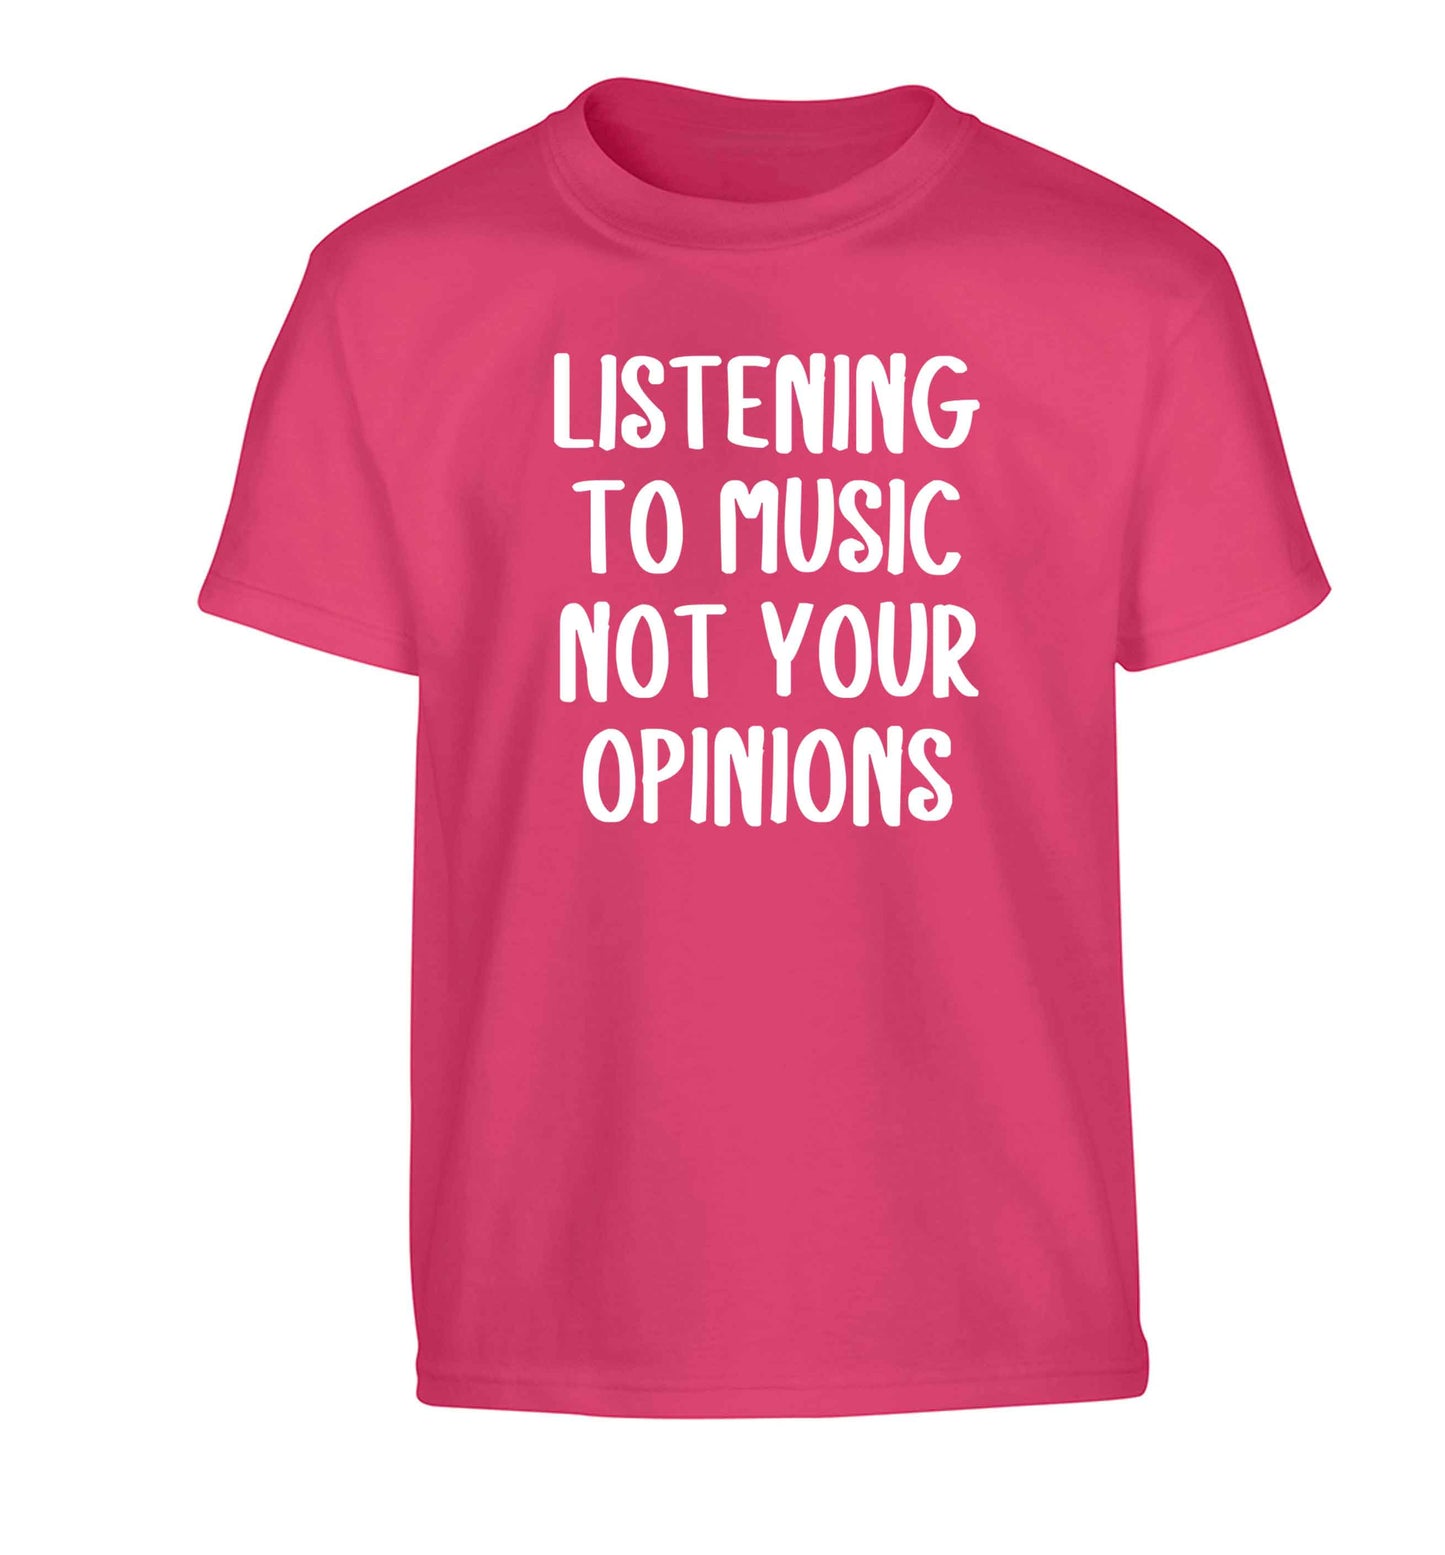 Listening to music not your opinions Children's pink Tshirt 12-13 Years